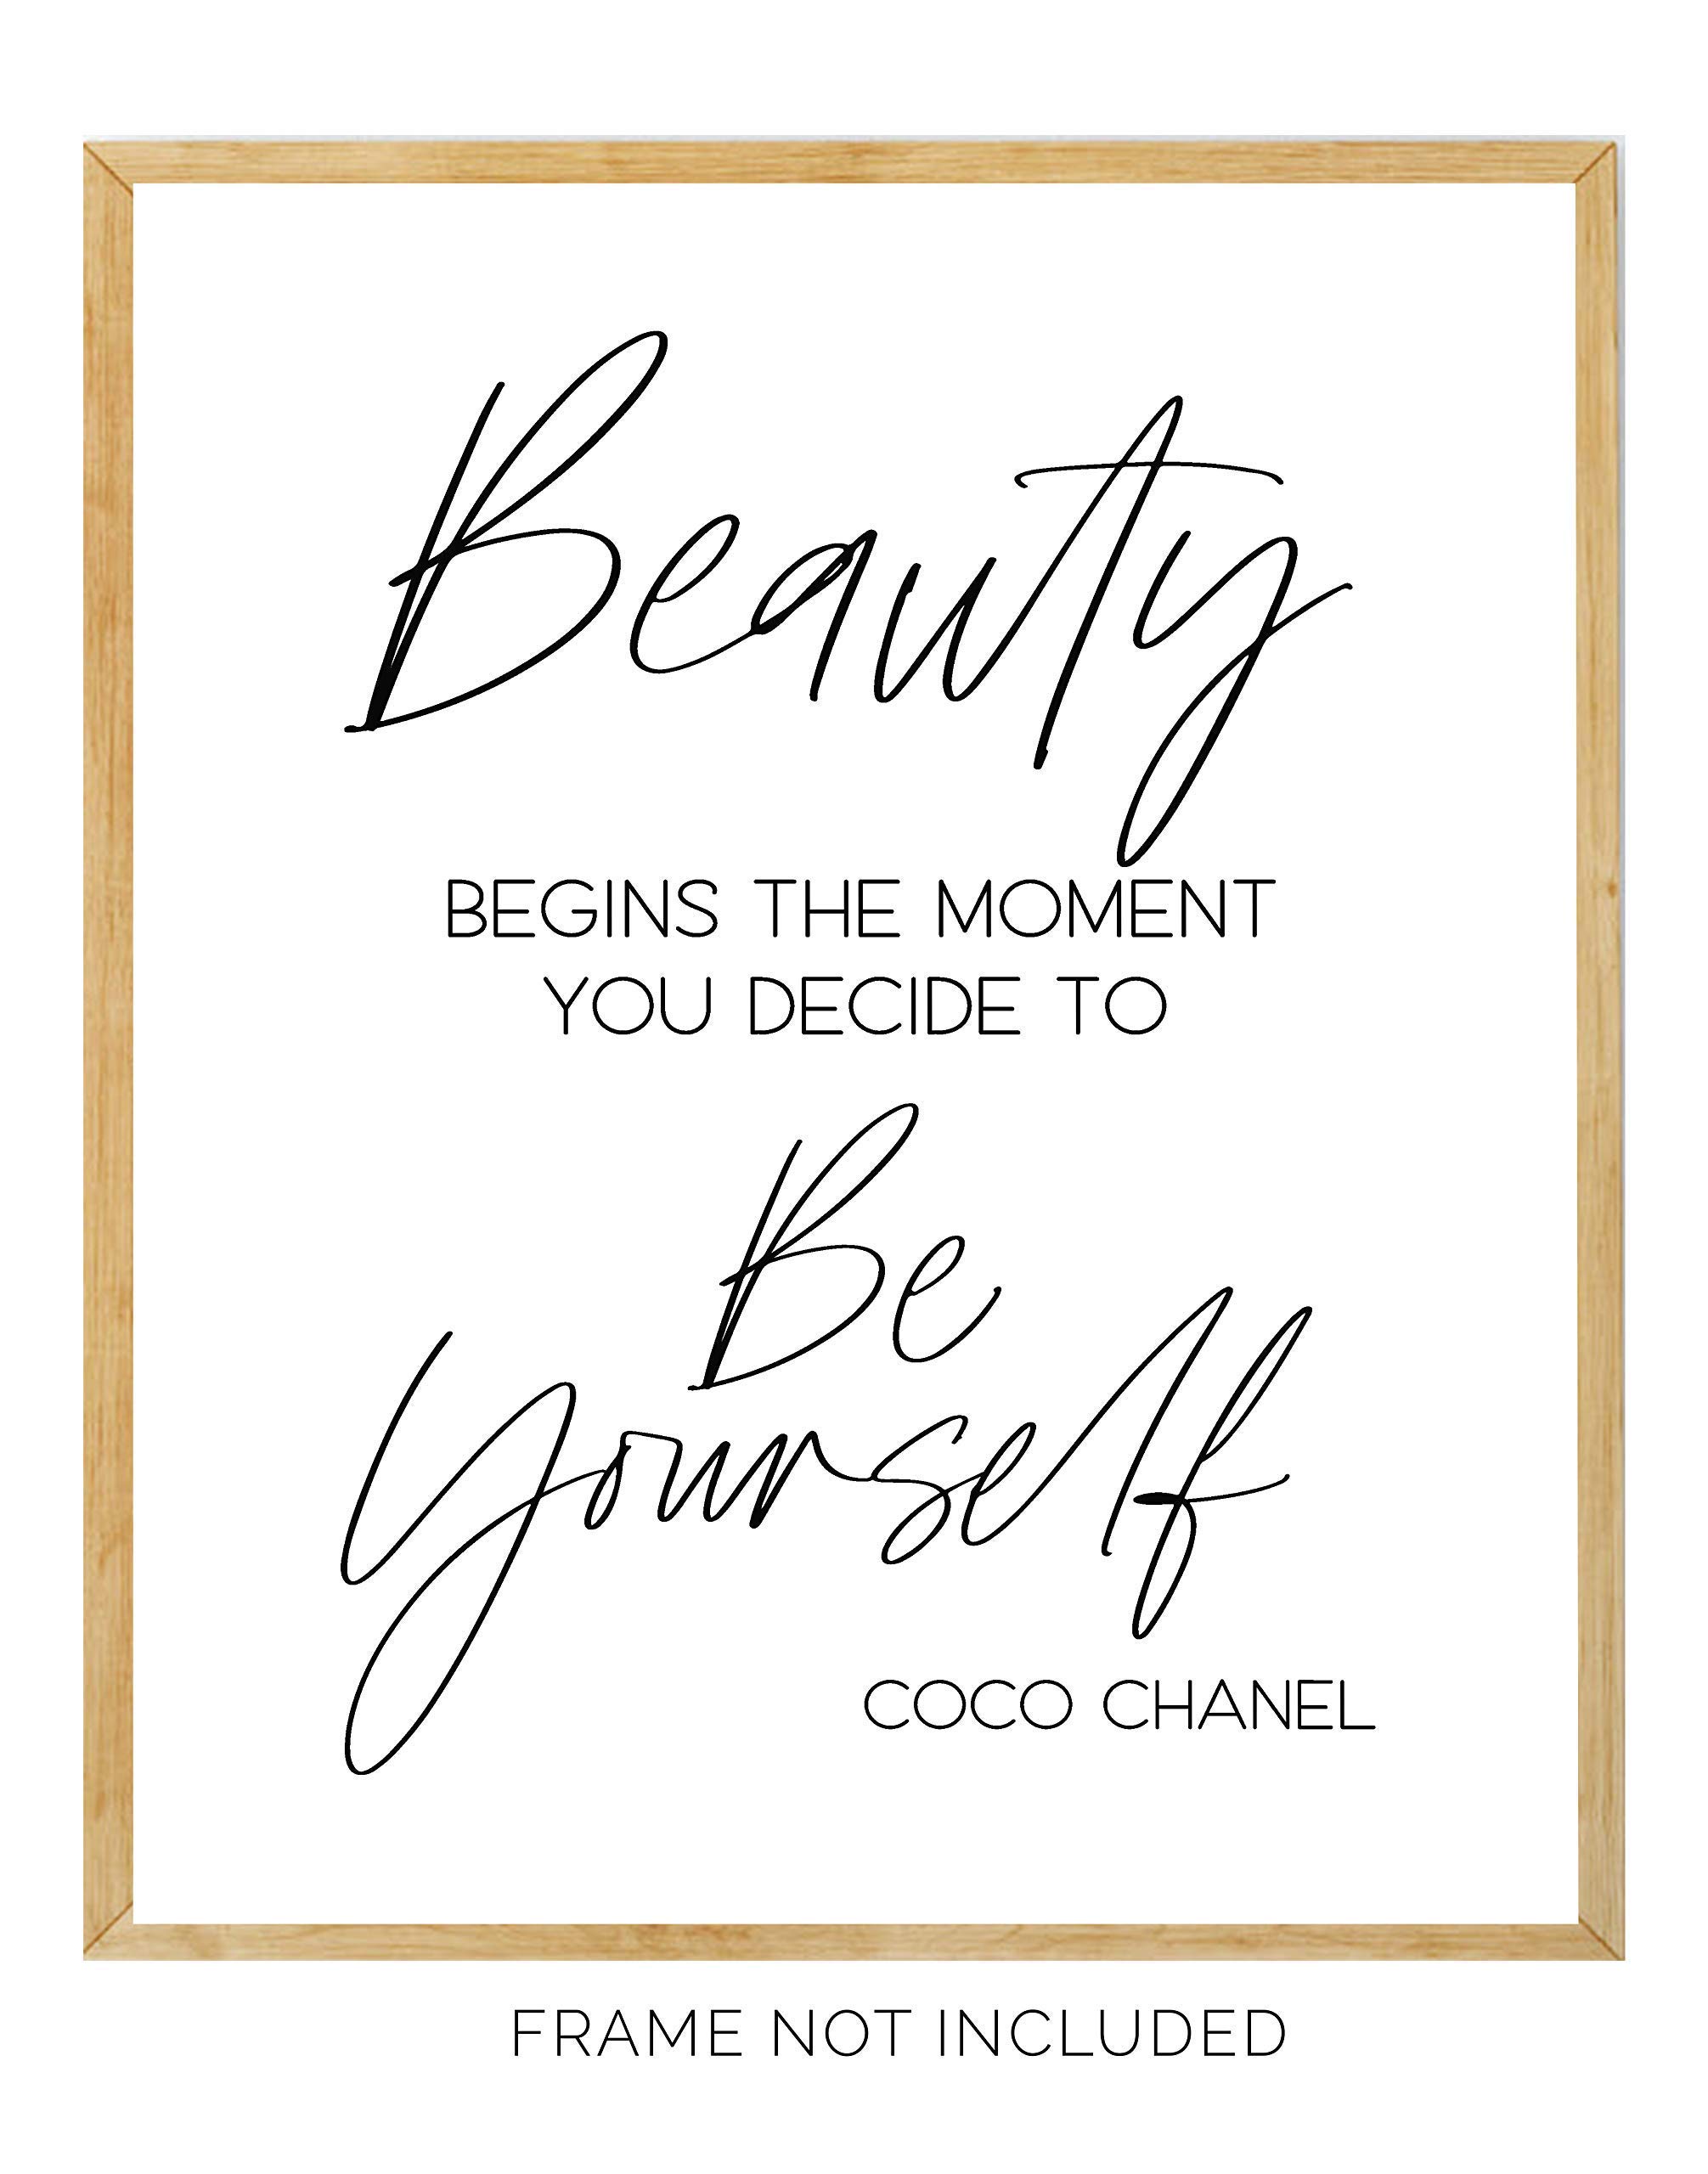 Coco Chanel quote Beauty begins the moment you decide to be yourself